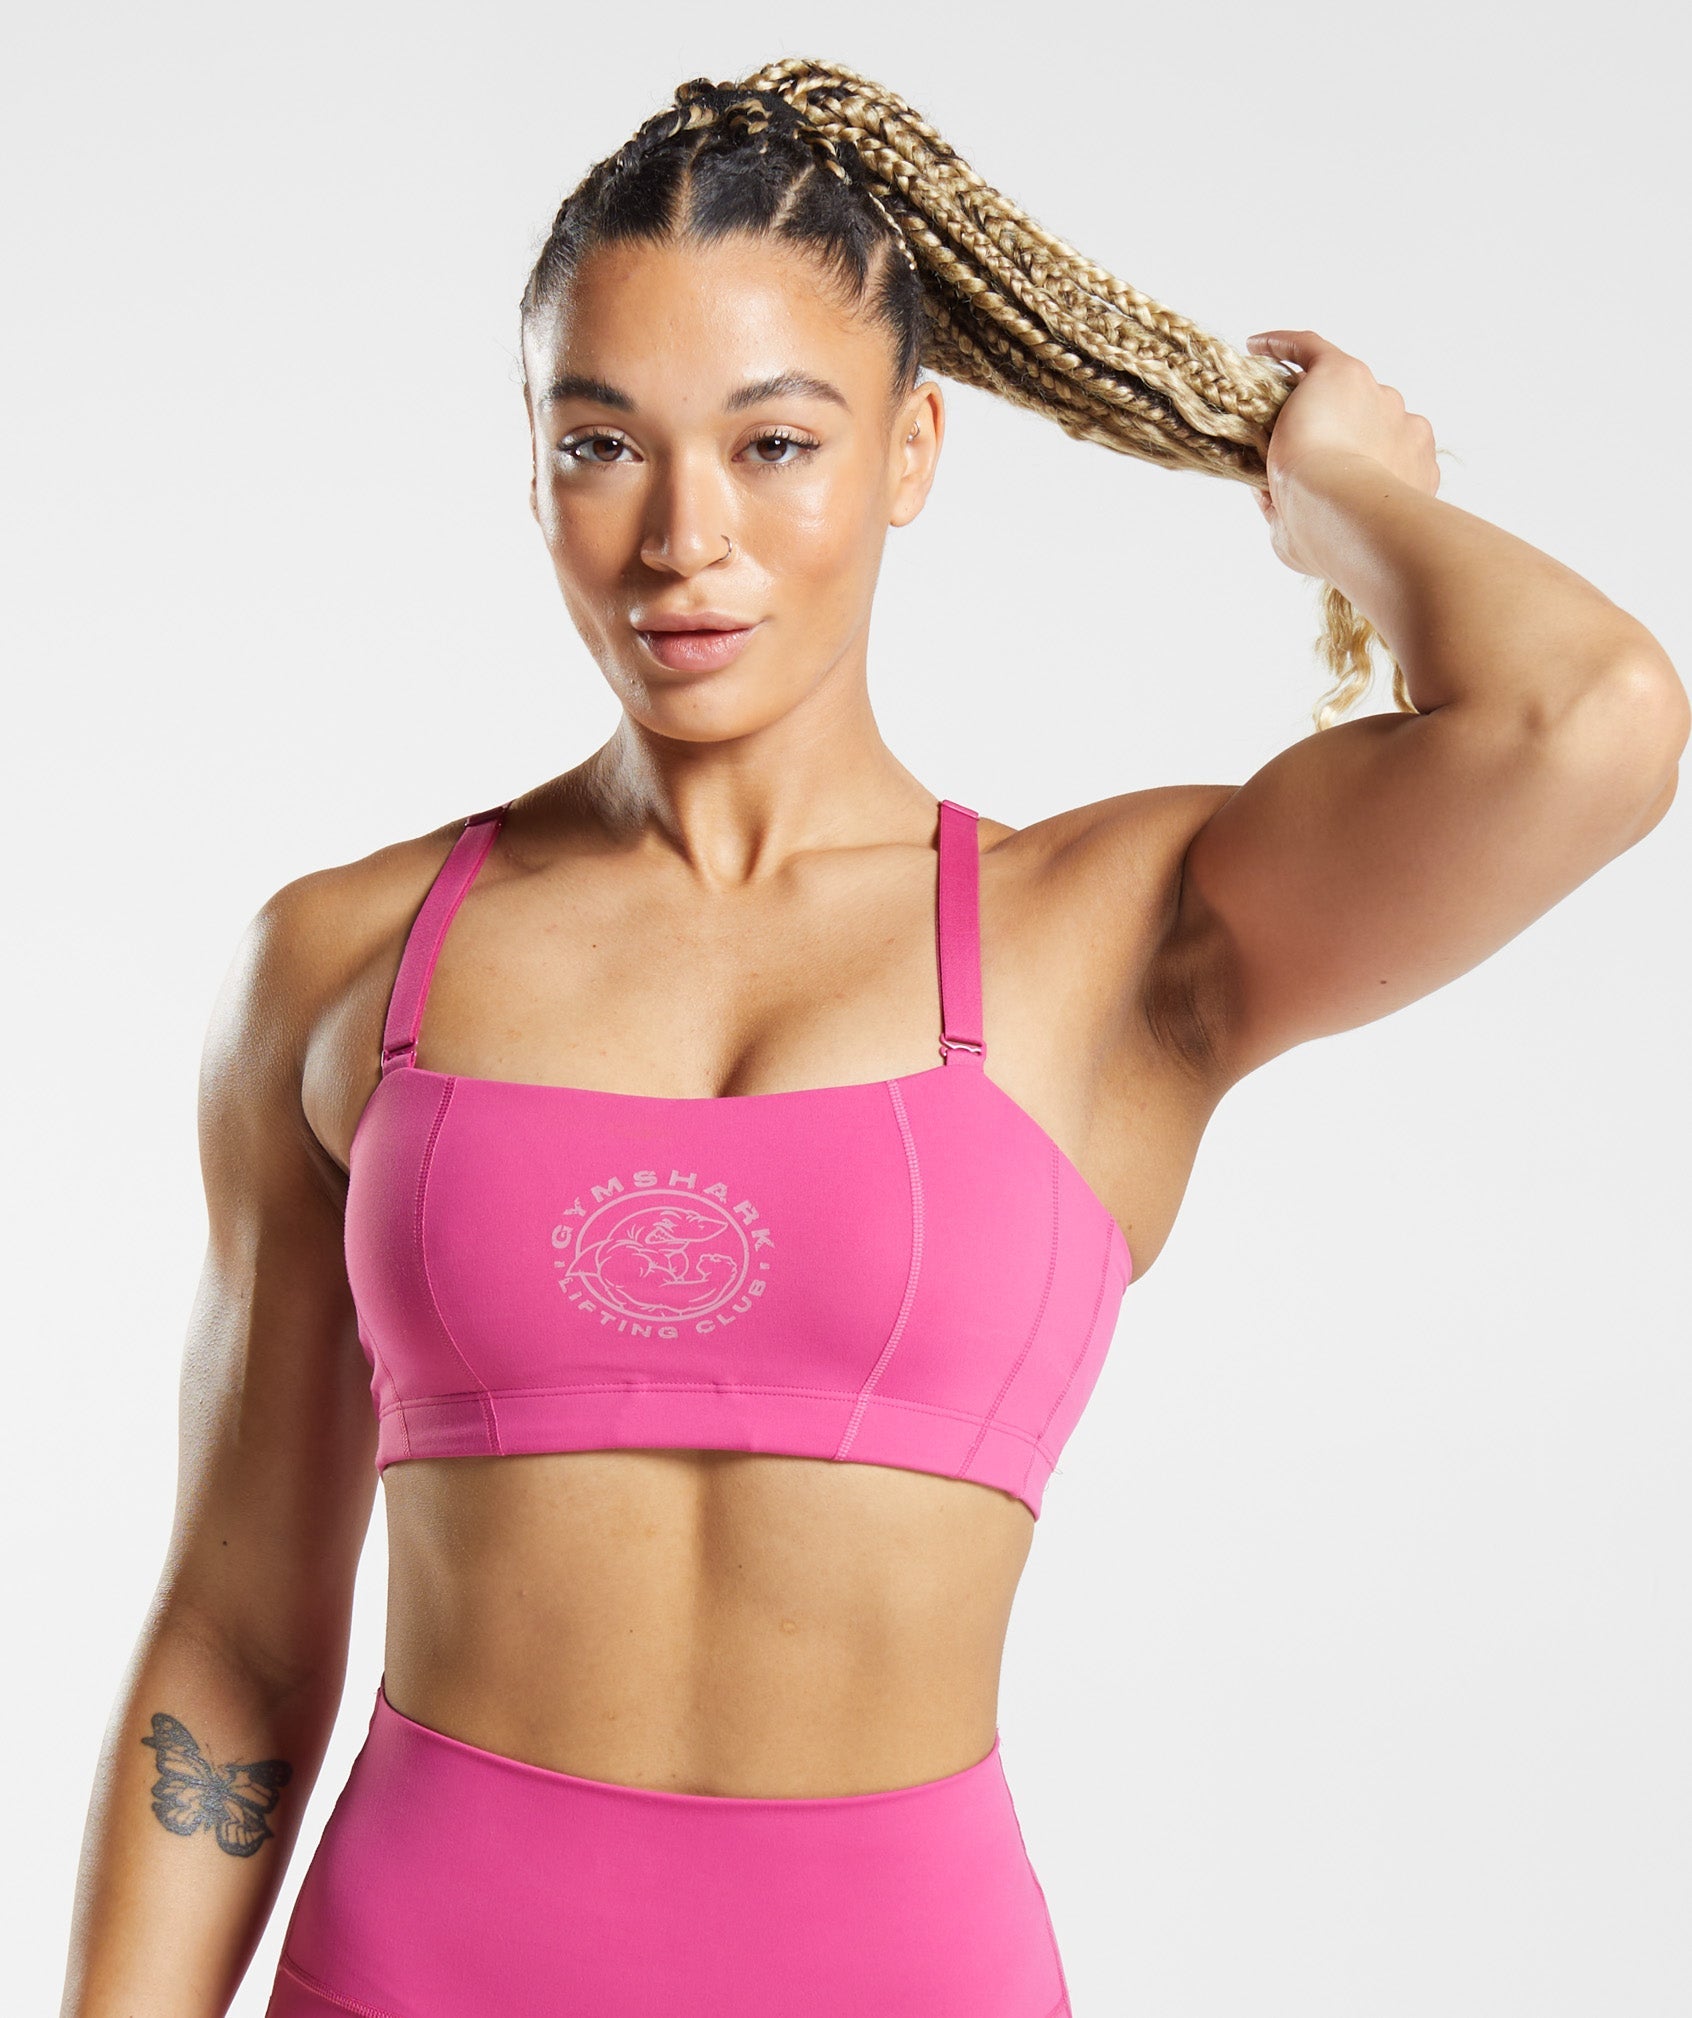 Women's Gym Set With Short Sleeves Pink Seamless Activewear –